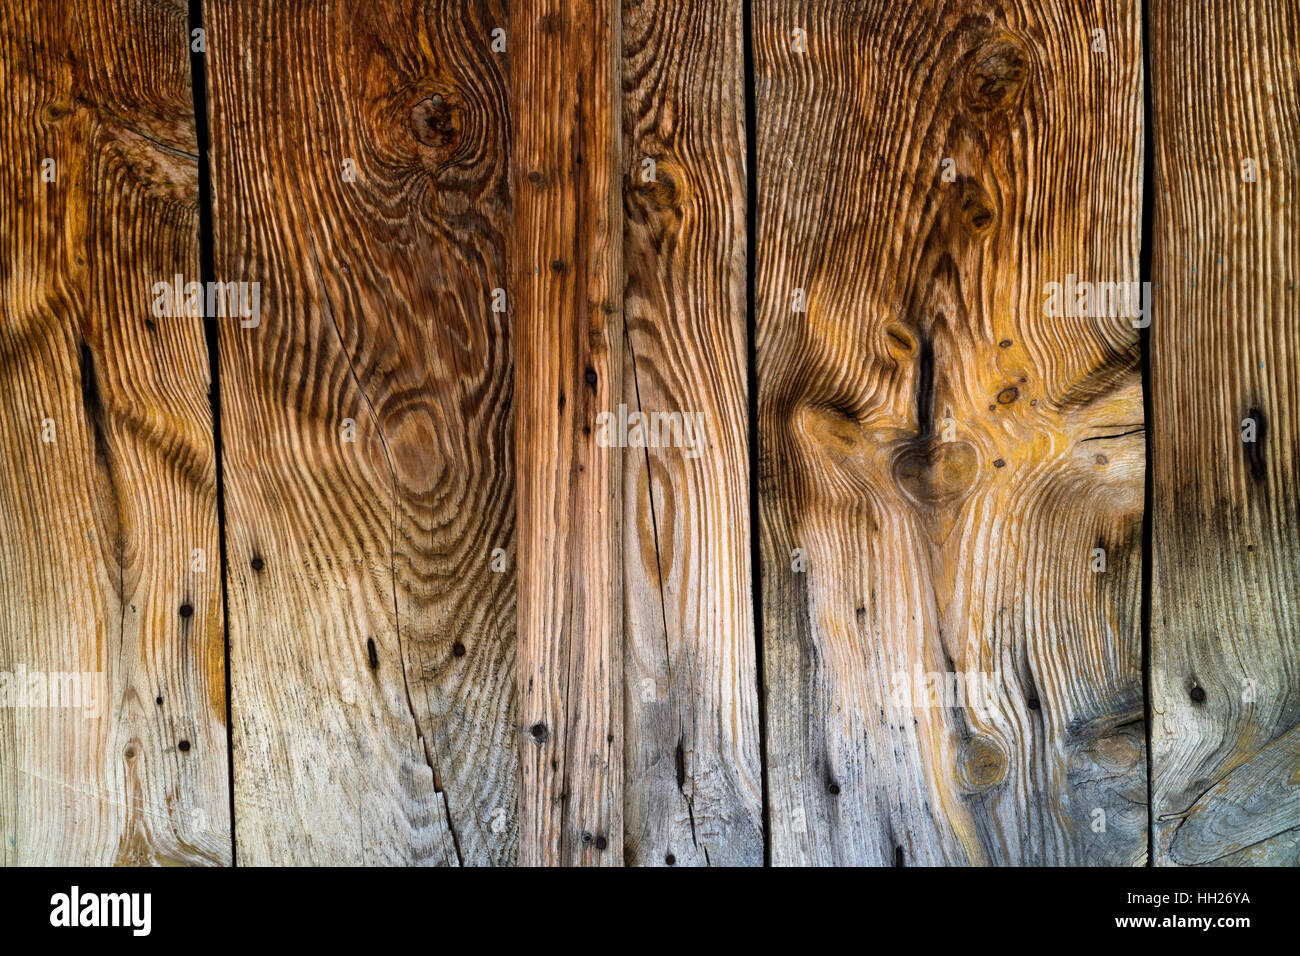 Aged wooden surface full frame Stock Photo